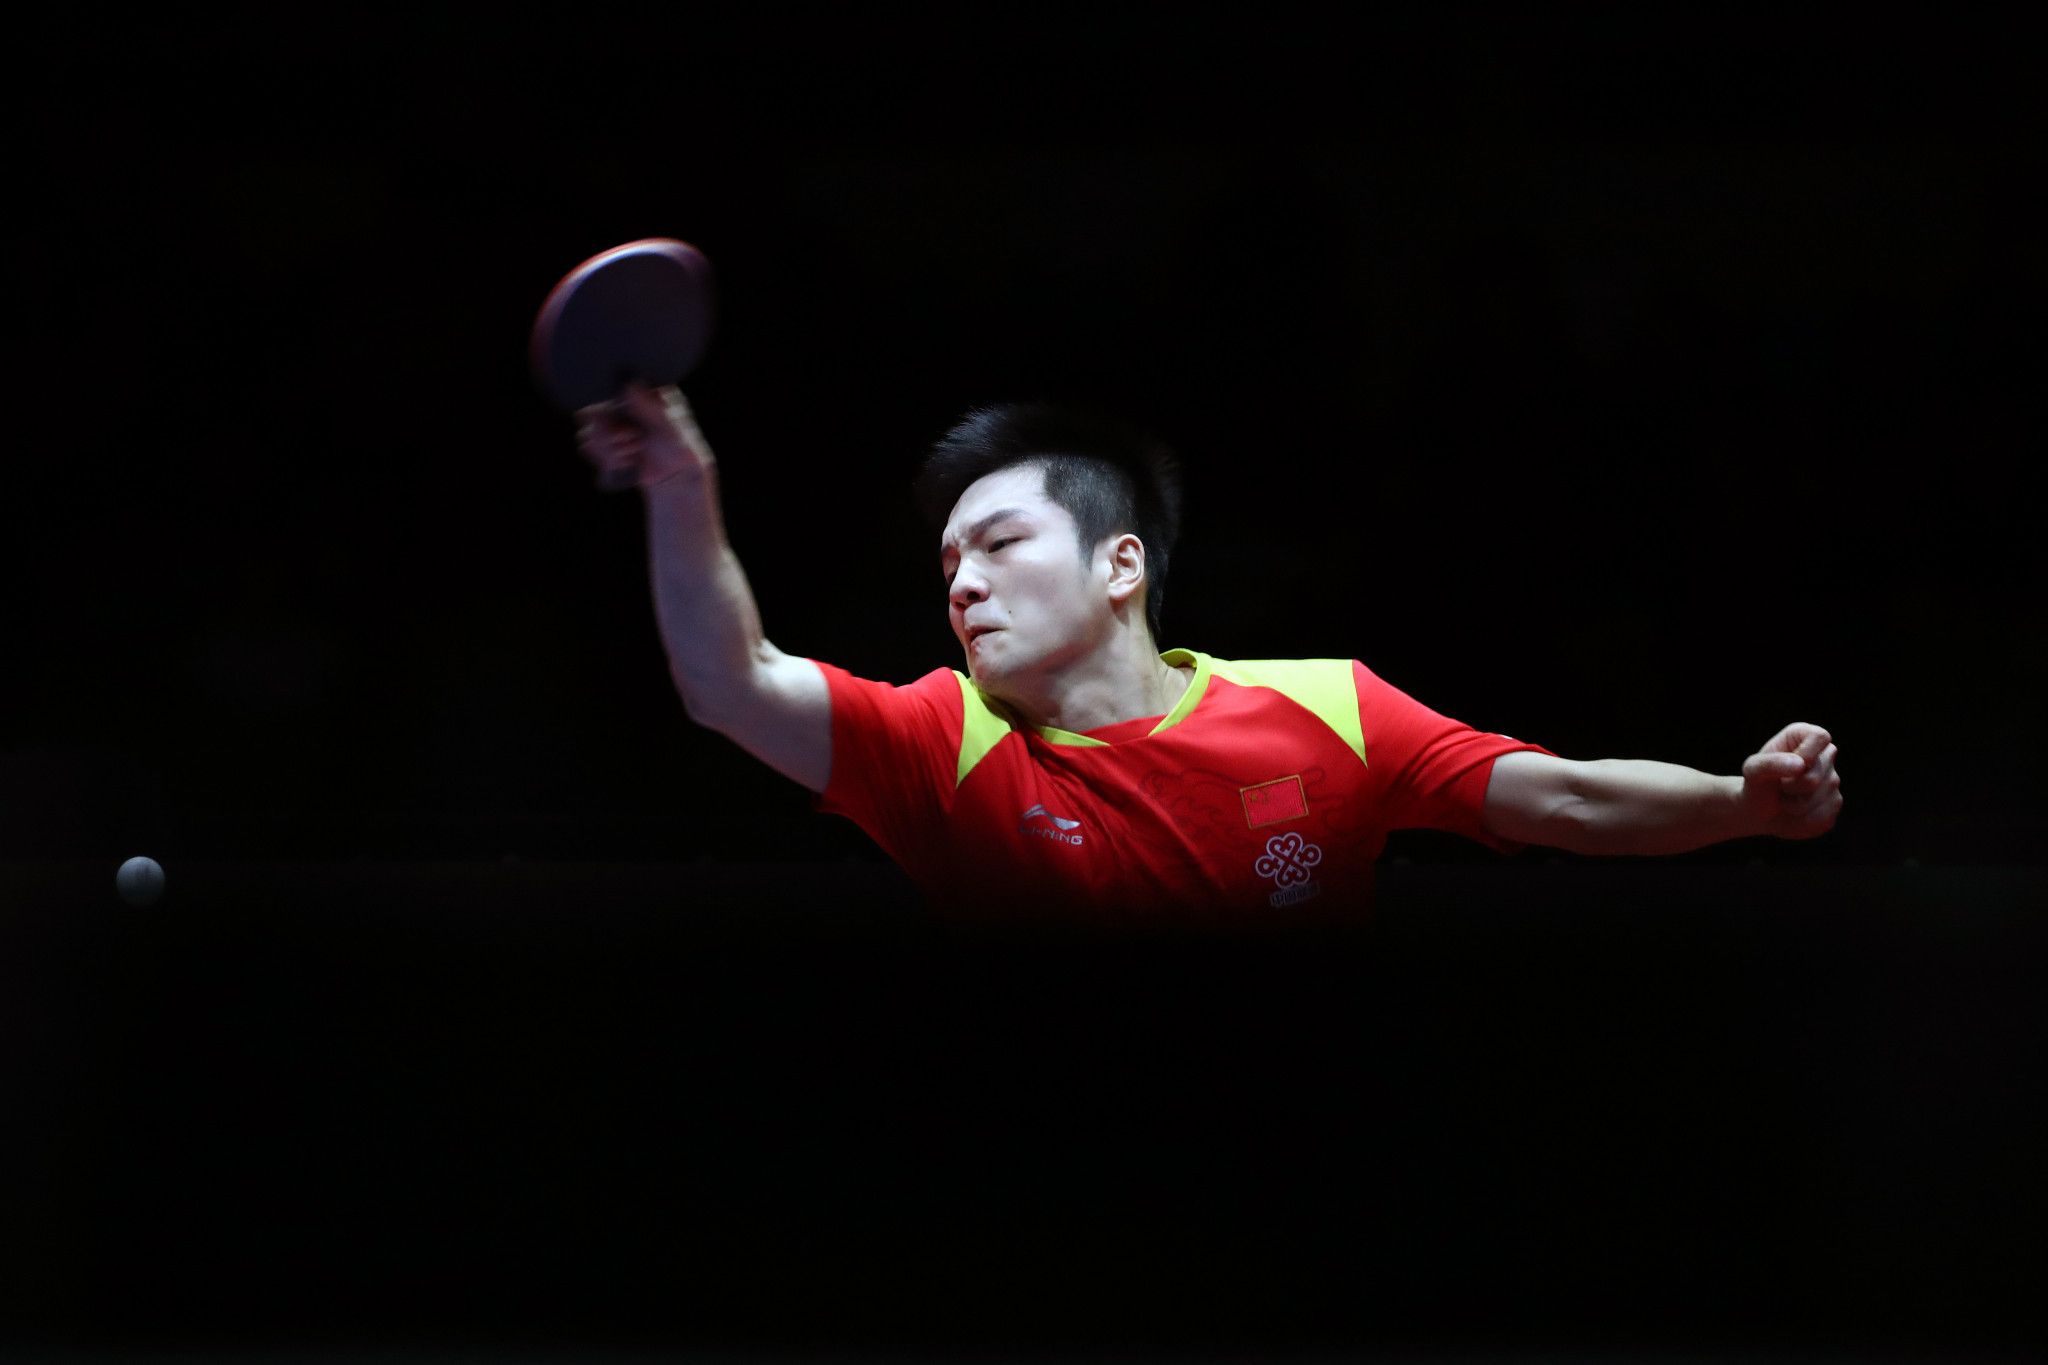 Defending champions untroubled on opening day at ITTF-ATTU Asian Cup as Hirano forced into playoffs